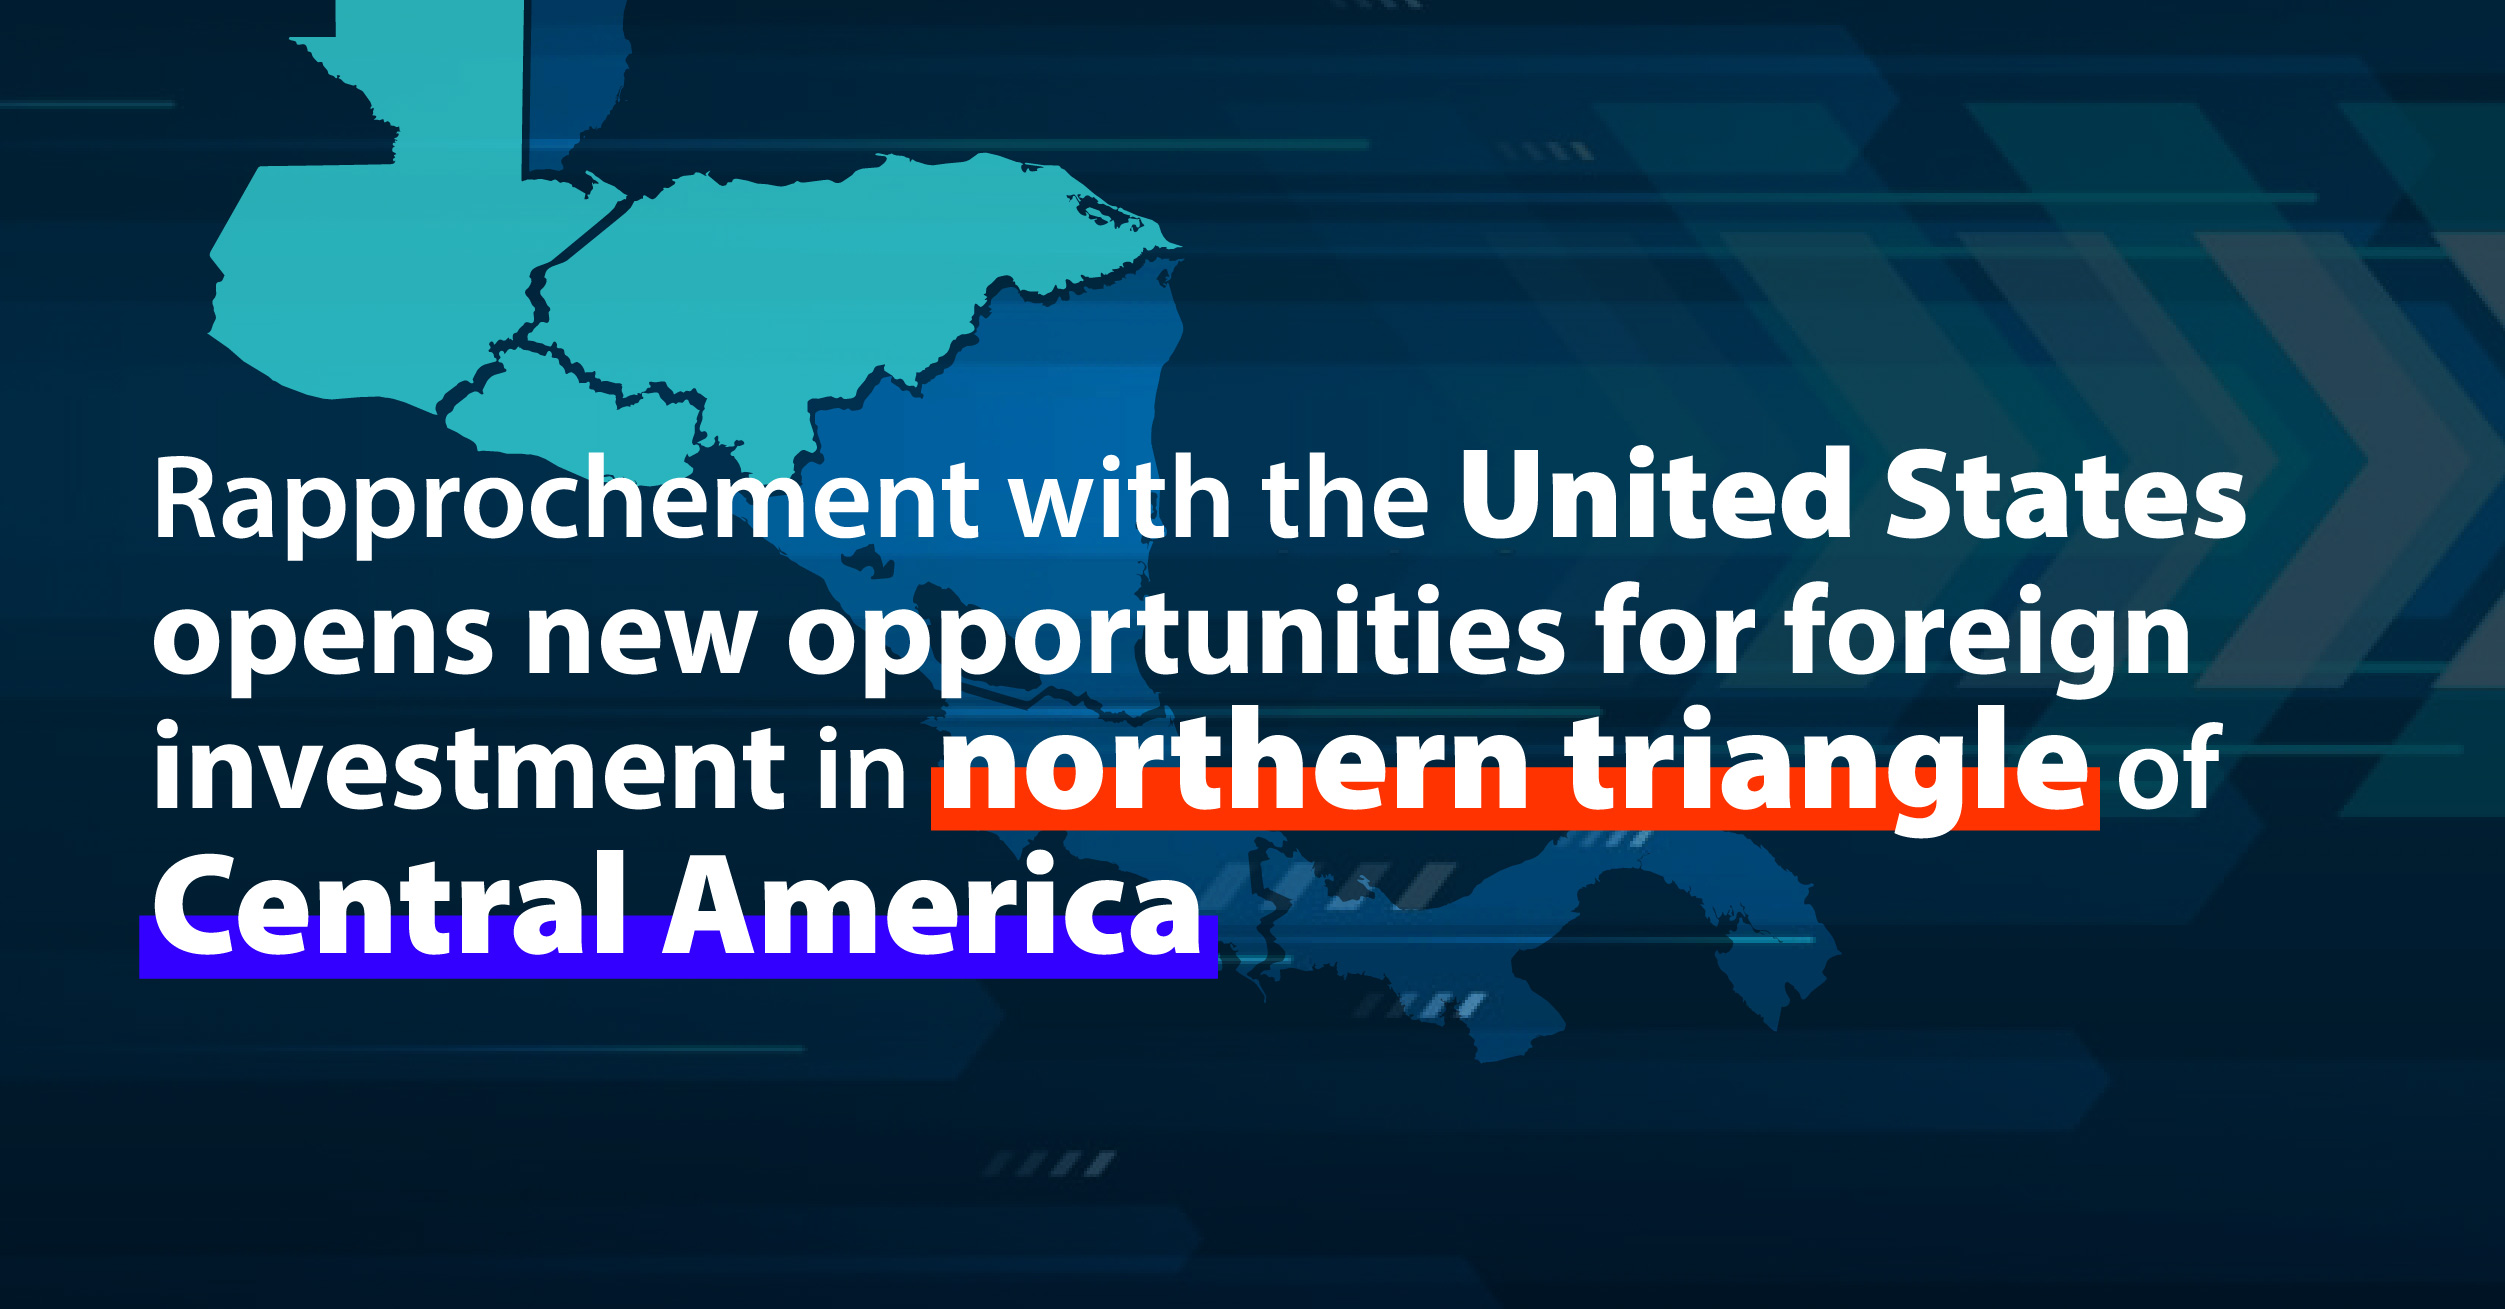 Rapprochement with the United States opens new routes for foreign investment in the northern triangle of Central America.